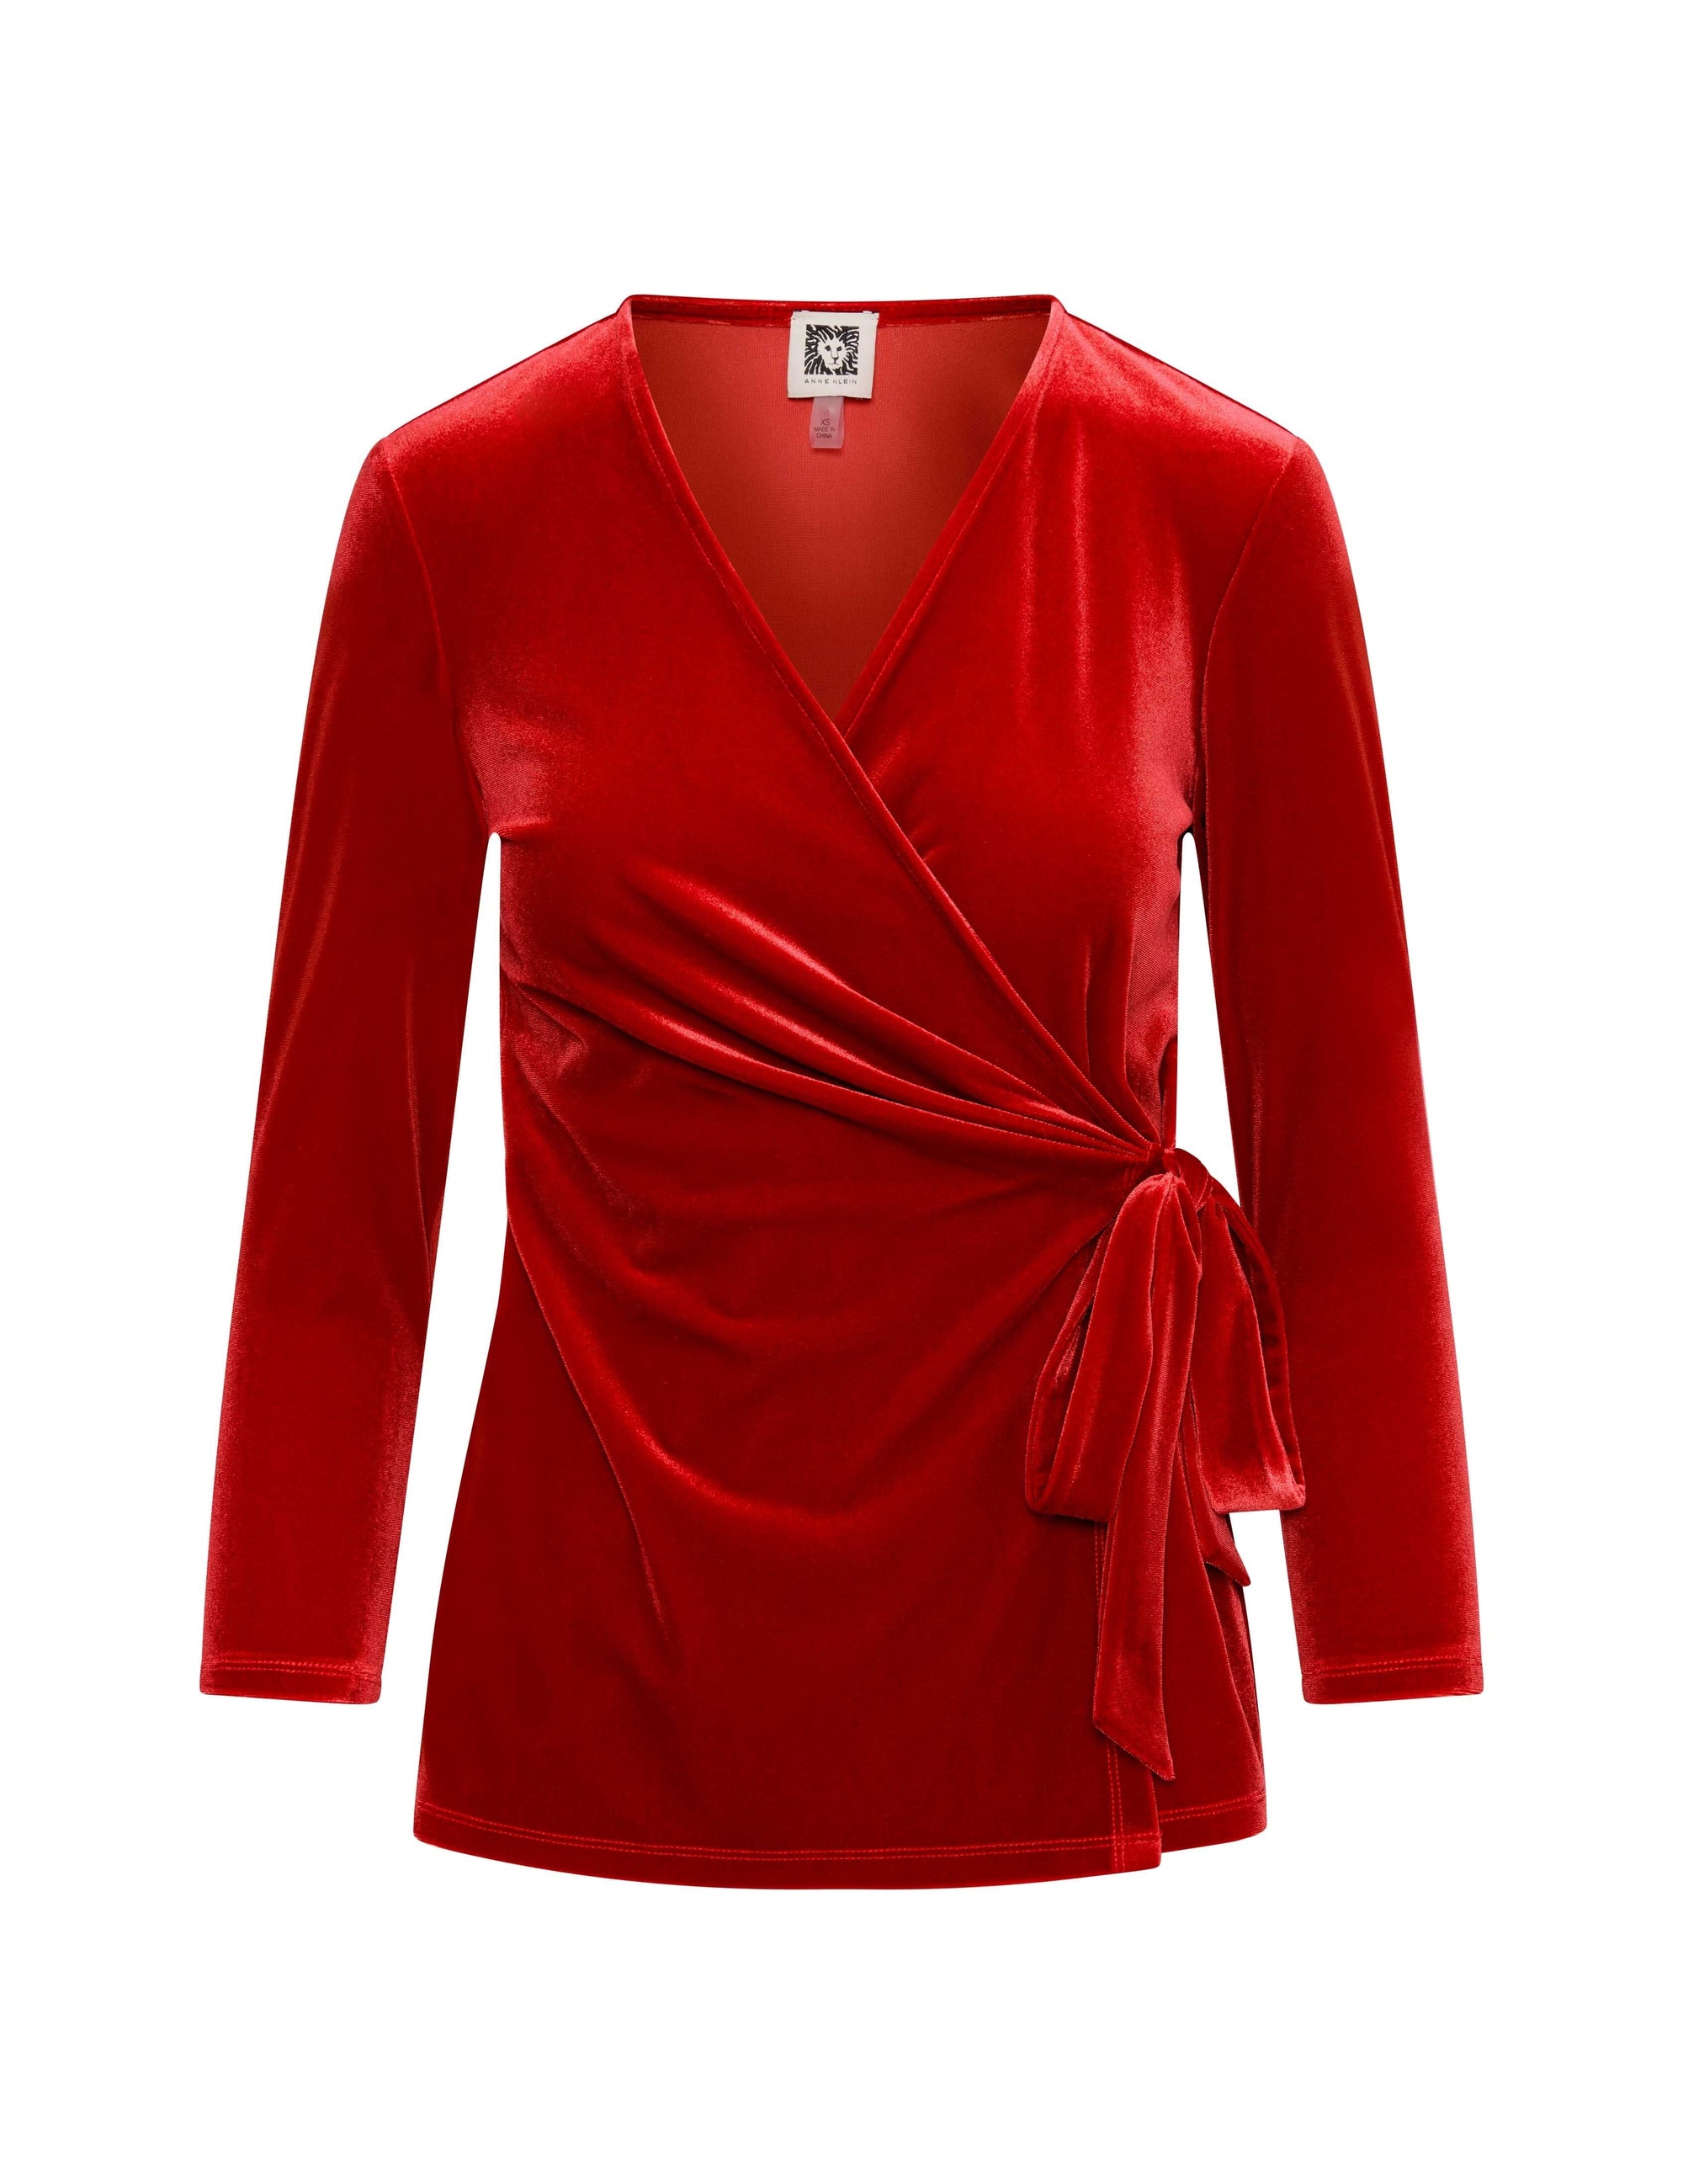 Anne Klein Titian Red Velour Three-Quarter Sleeve Wrap Top- Clearance